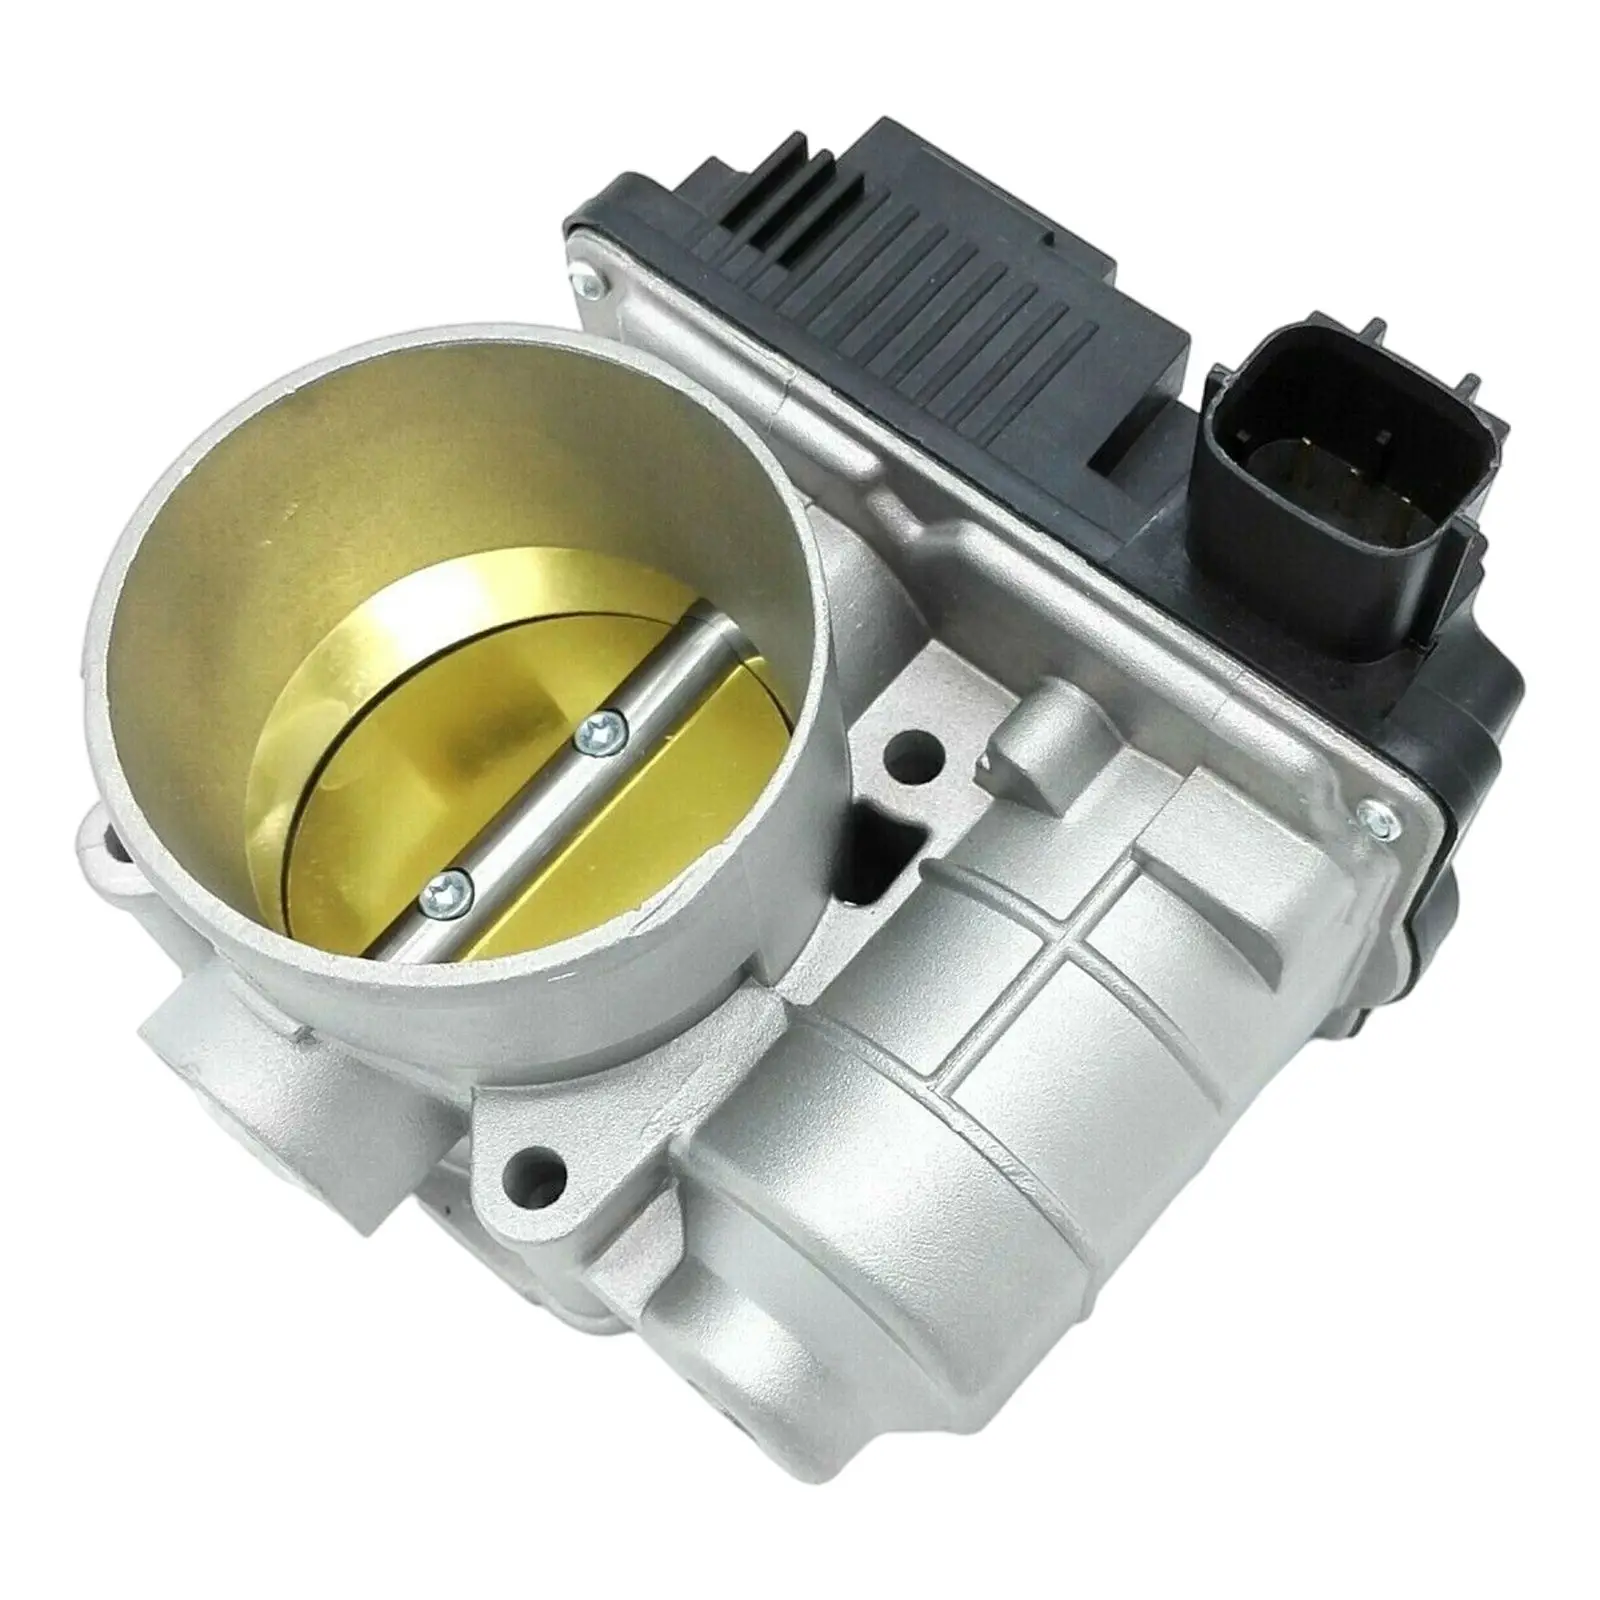 16119-AE013, Idle Air Control Sensor Electronic Aembly Fuel Injection Sera576-01, Throttle Body Fit for Nian Car Parts